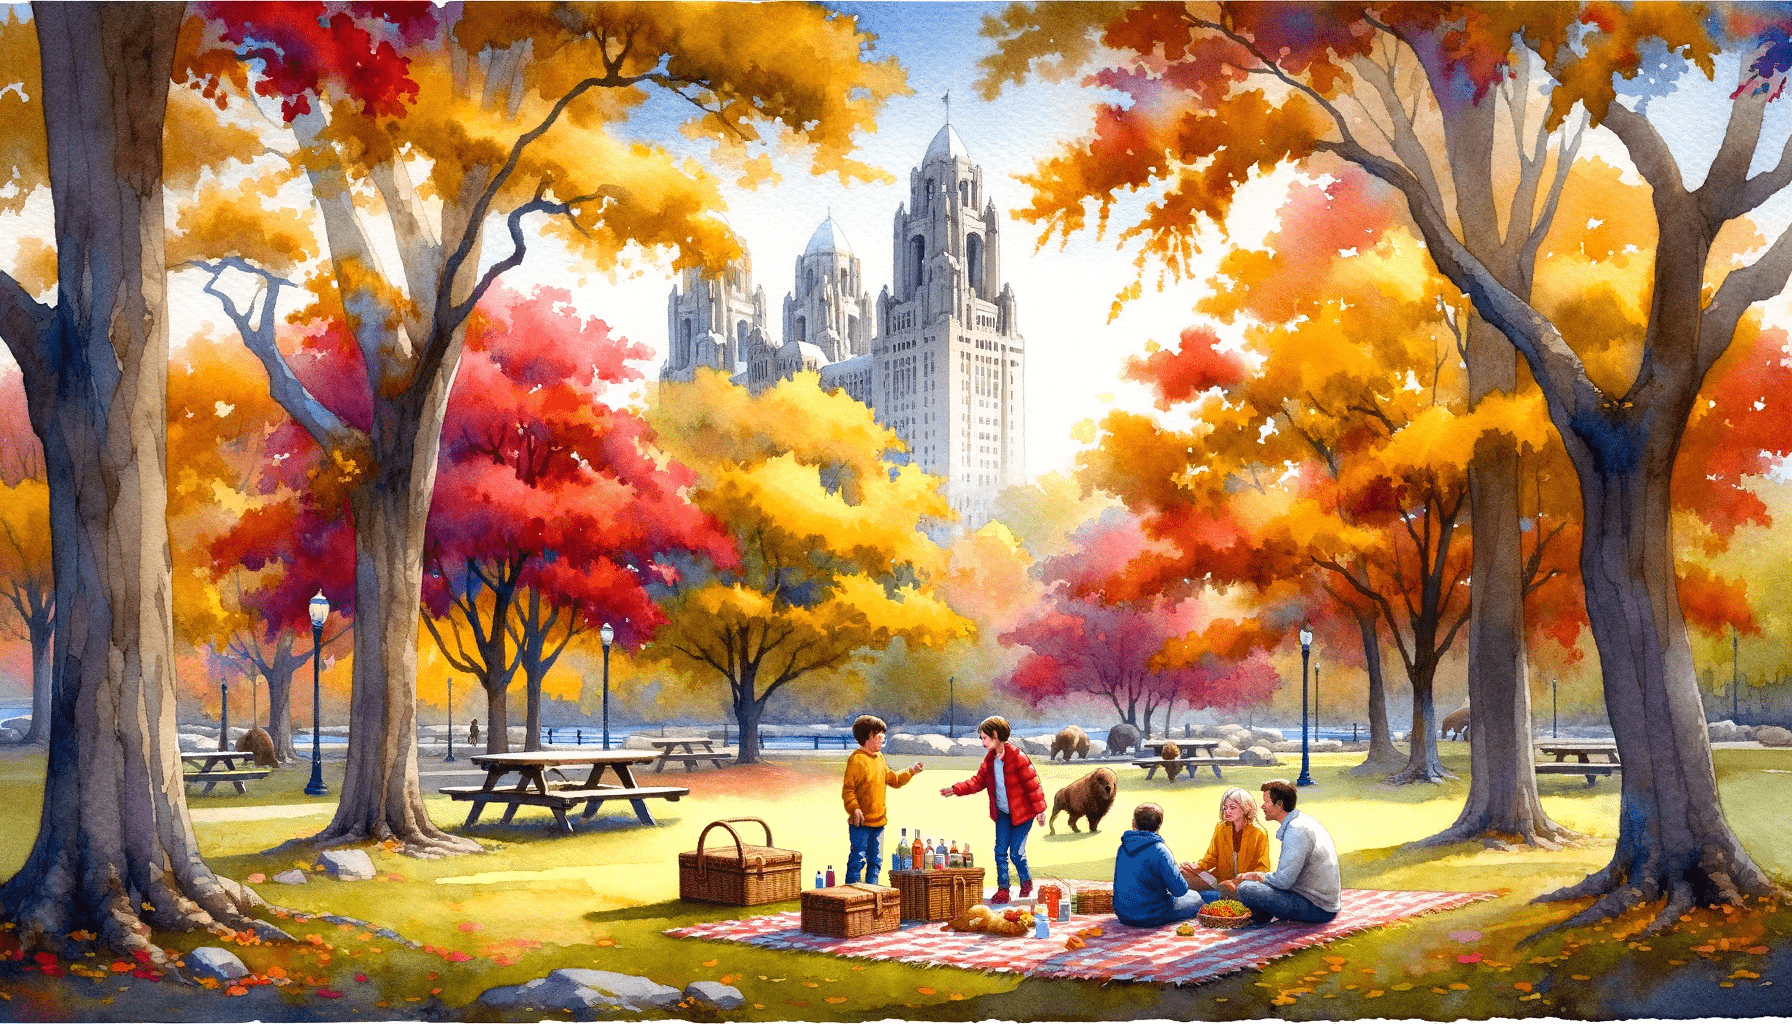 Watercolor painting of a family visiting Buffalo's famous parks during fall. Trees with golden and red leaves surround them, and they are having a pic-min